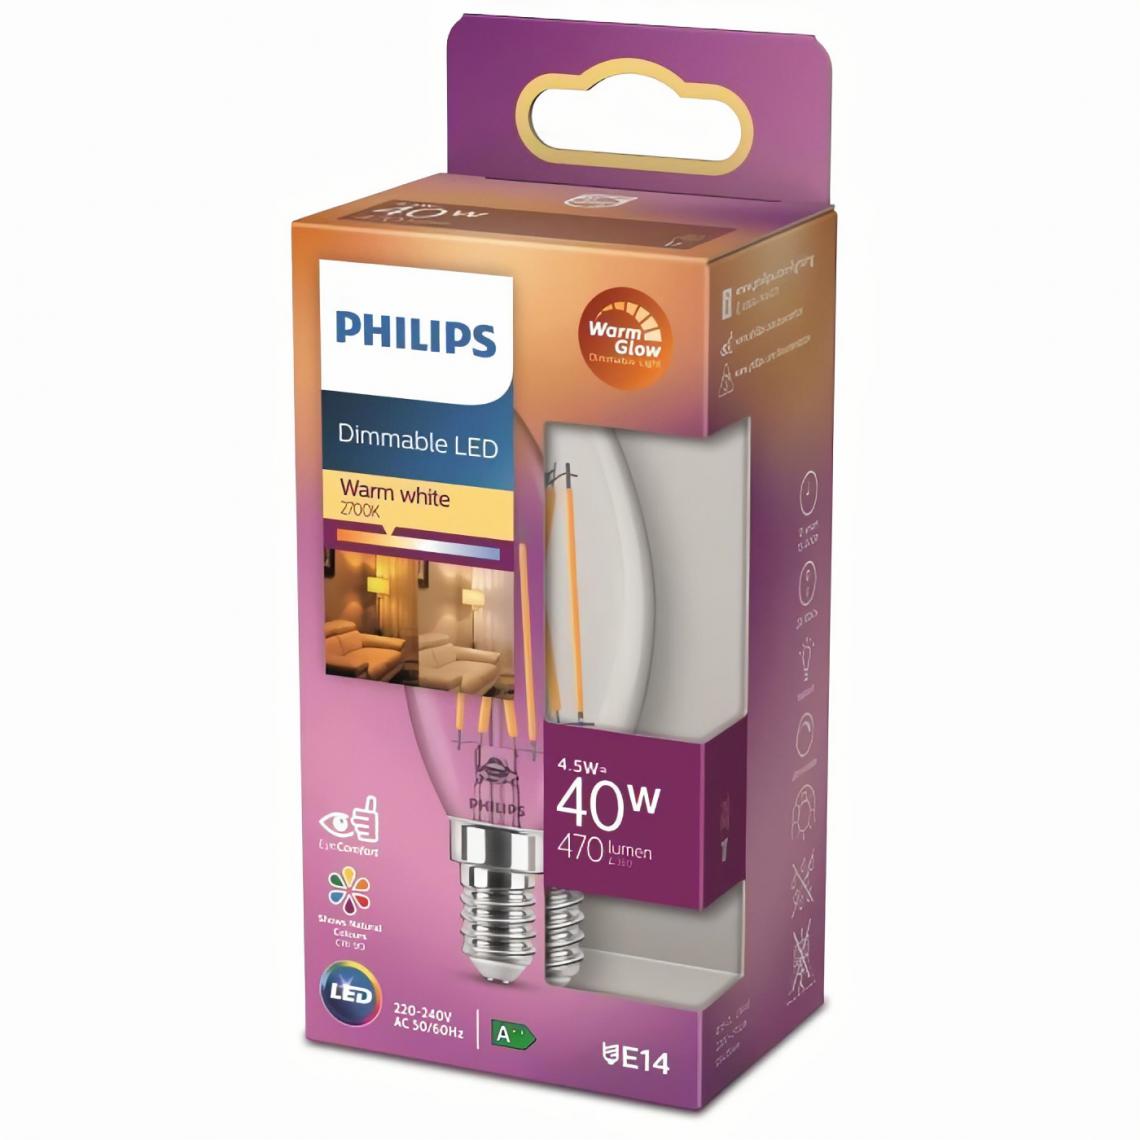 Philips - Philips ampoule LED Equivalent 40W E14 dimmable, verre - Ampoules LED